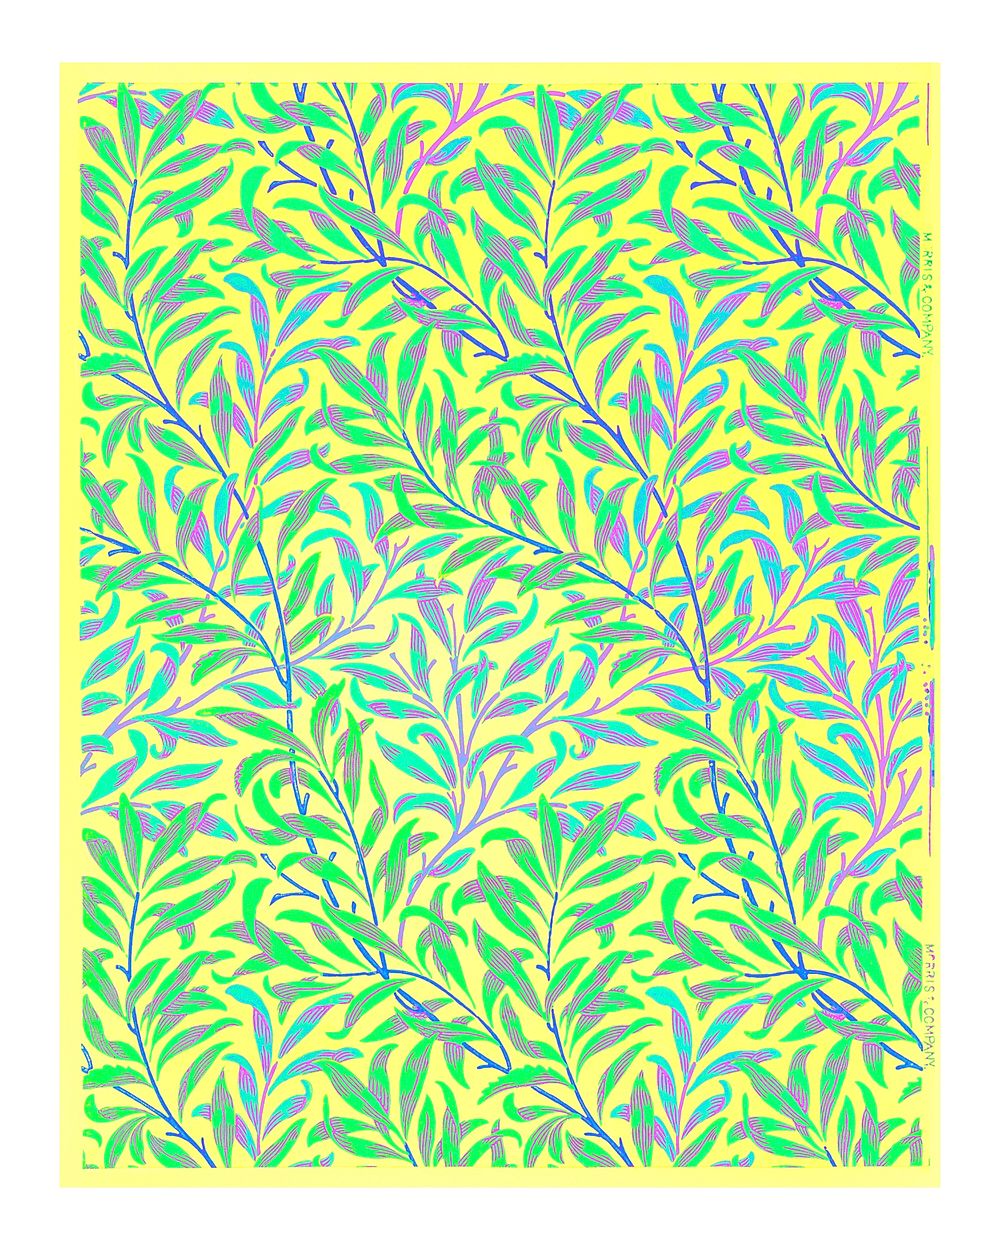 Willow wallpaper pattern wall art print and poster. Remix from original illustration by William Morris.